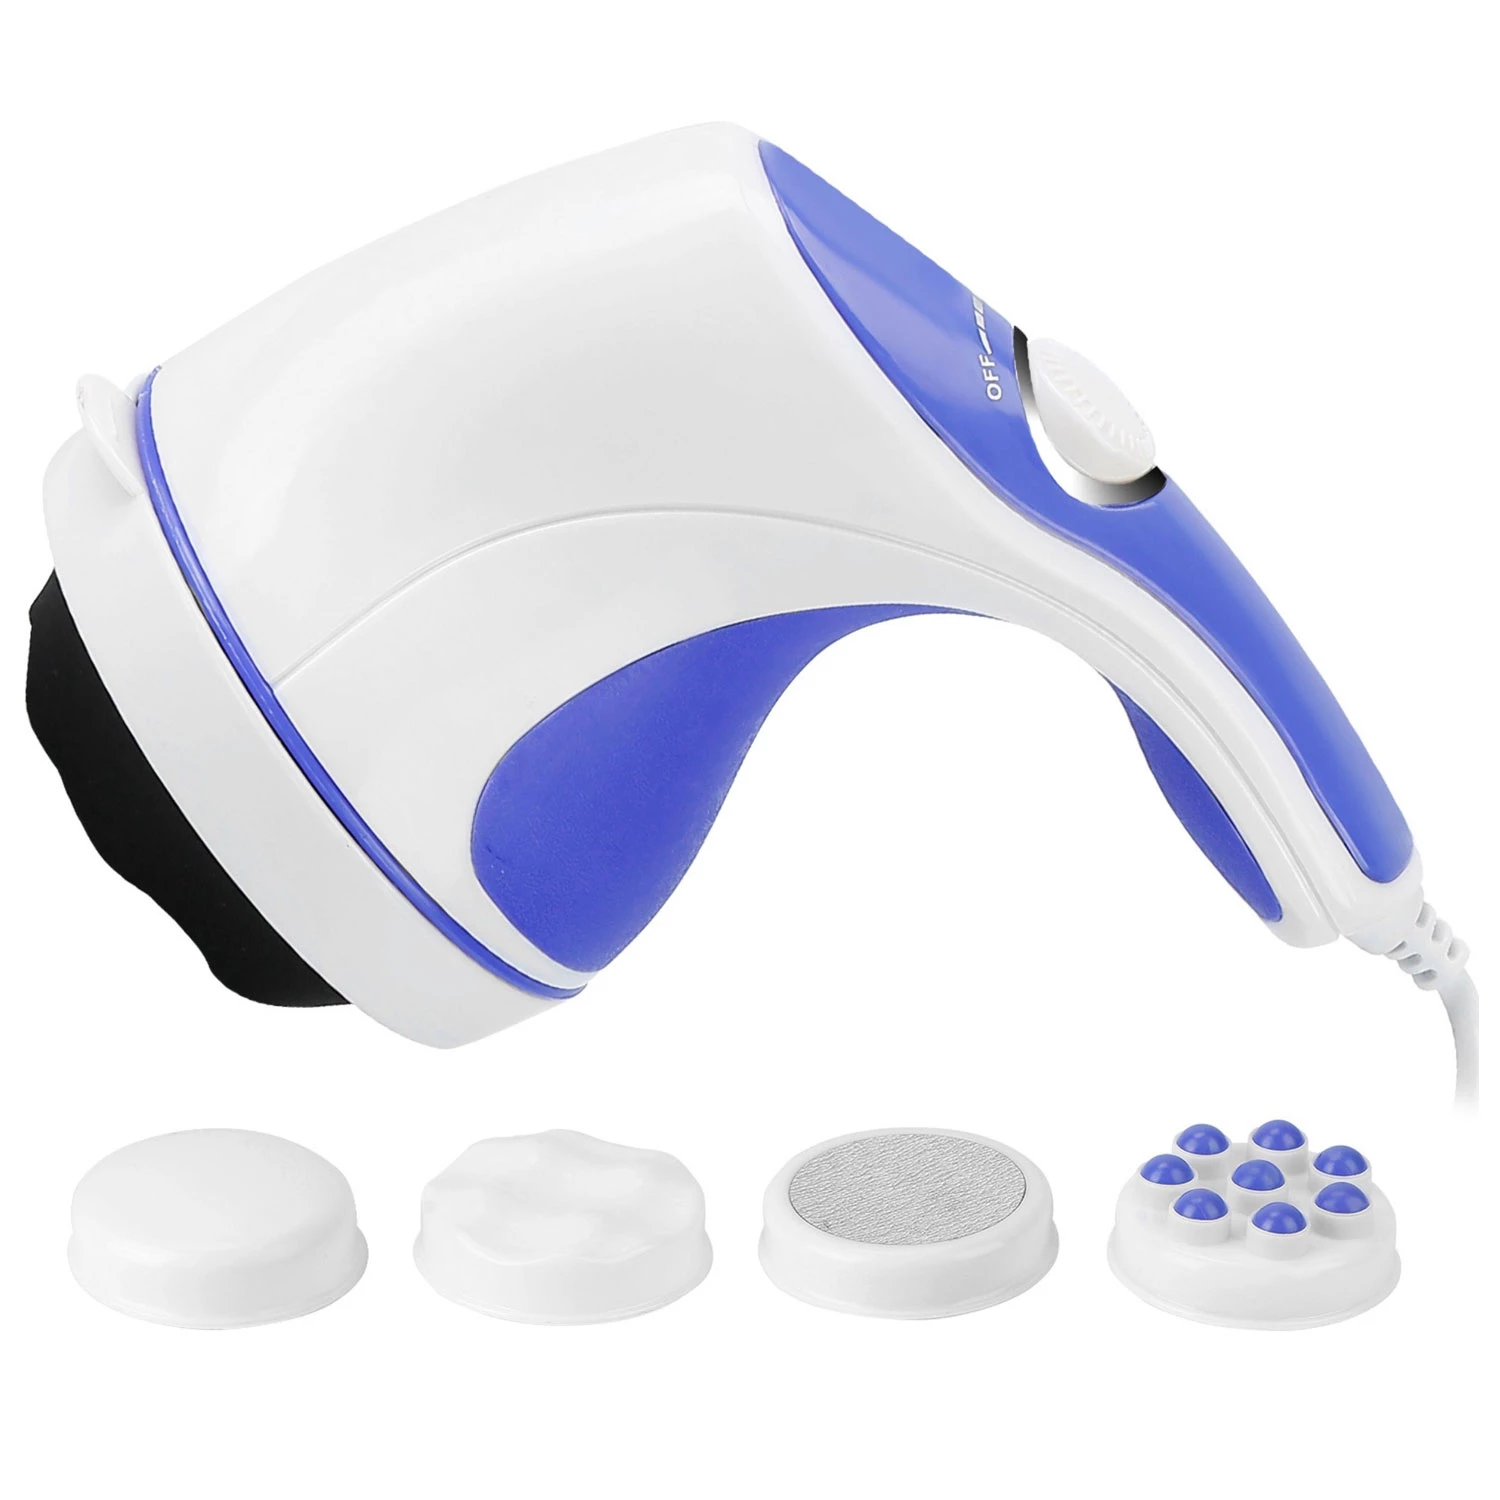 4-in-1 Electric Handheld Body Massager With Interchangeable Heads